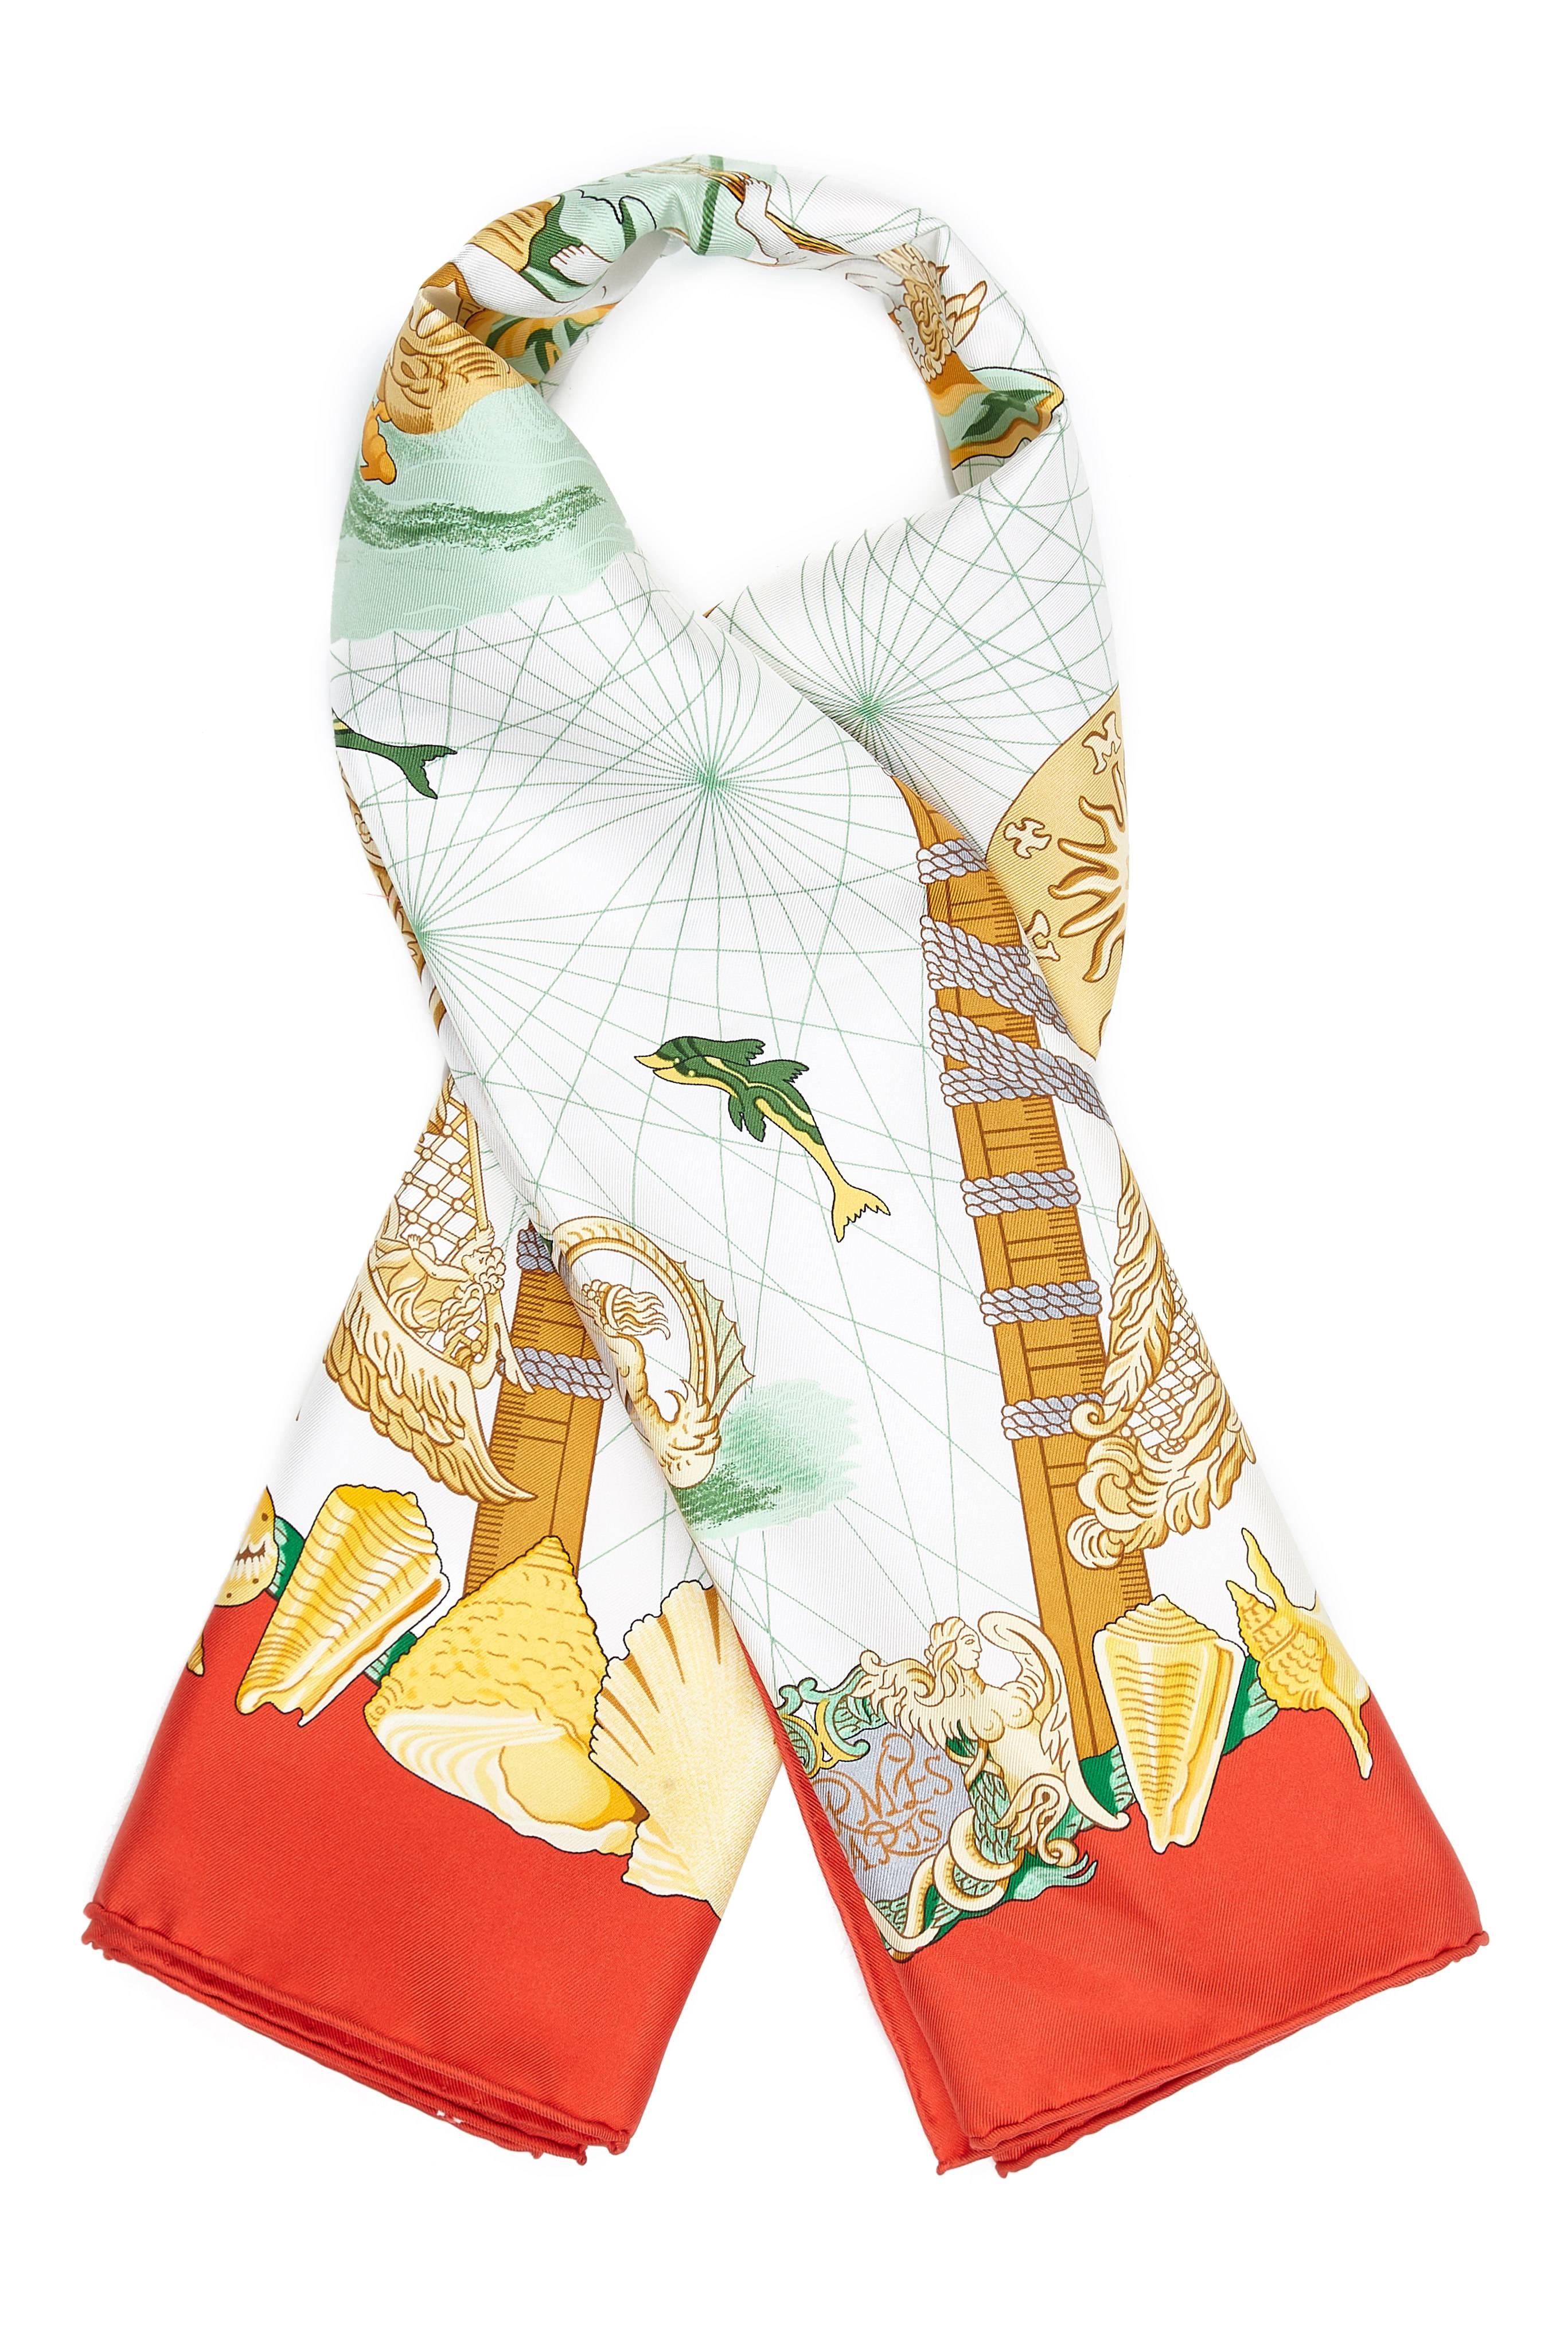 Balade Oceane vintage Hermes silk twill scarf designed by Julia Abadie and featuring a lovely ocean themed design in white, red, green and gold.  This is dated to 1999, the first and only issue of this scarf.  In excellent vintage crisp condition -